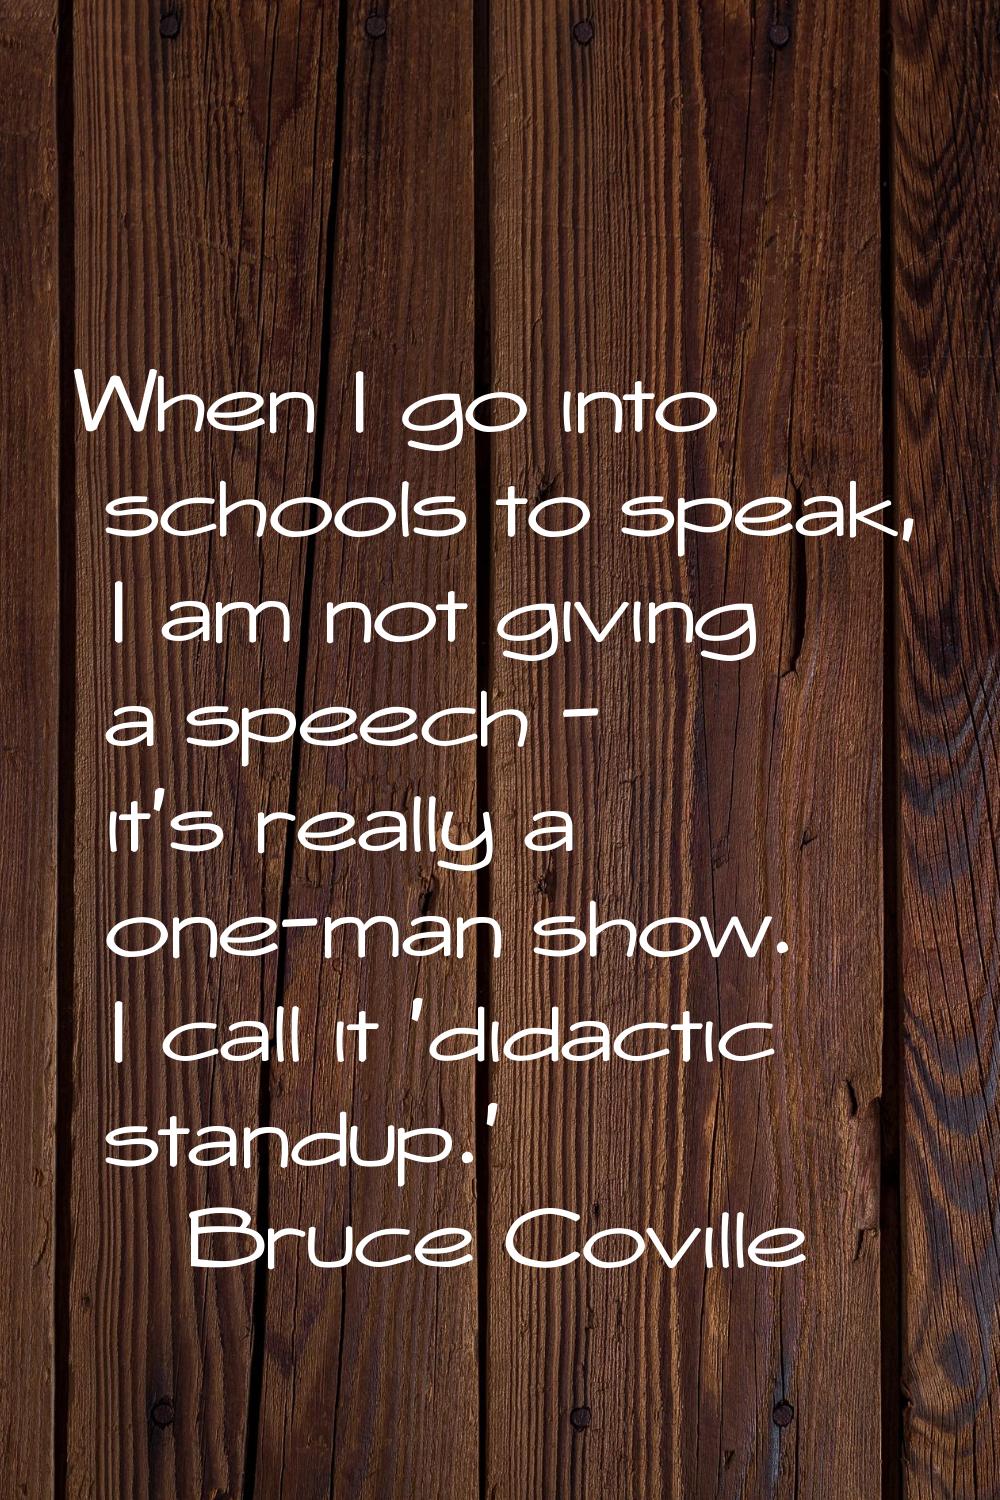 When I go into schools to speak, I am not giving a speech - it's really a one-man show. I call it '